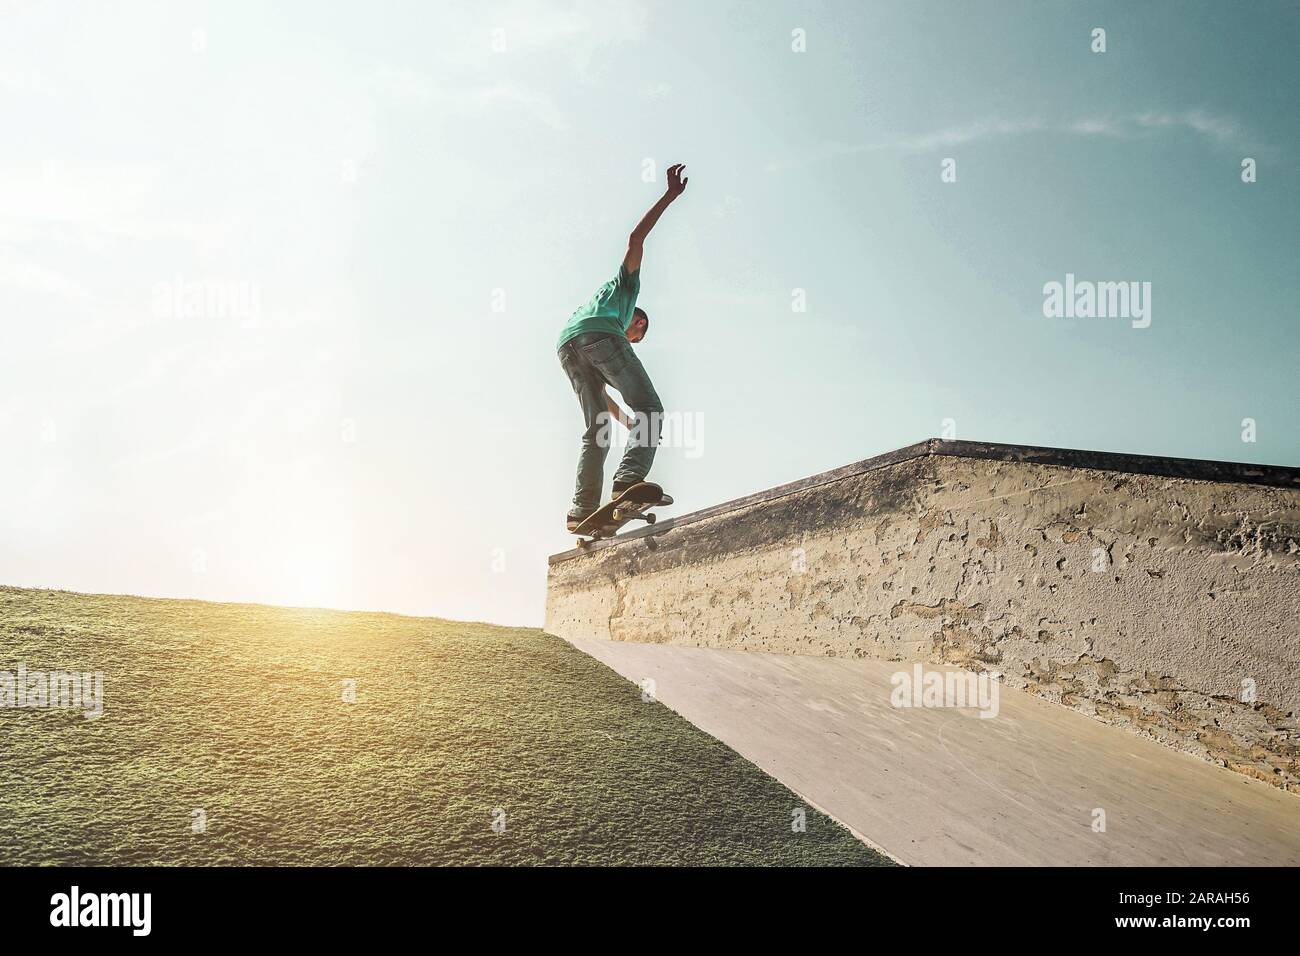 Teen Skateboarding Silhouette High Resolution Stock Photography and Images  - Alamy